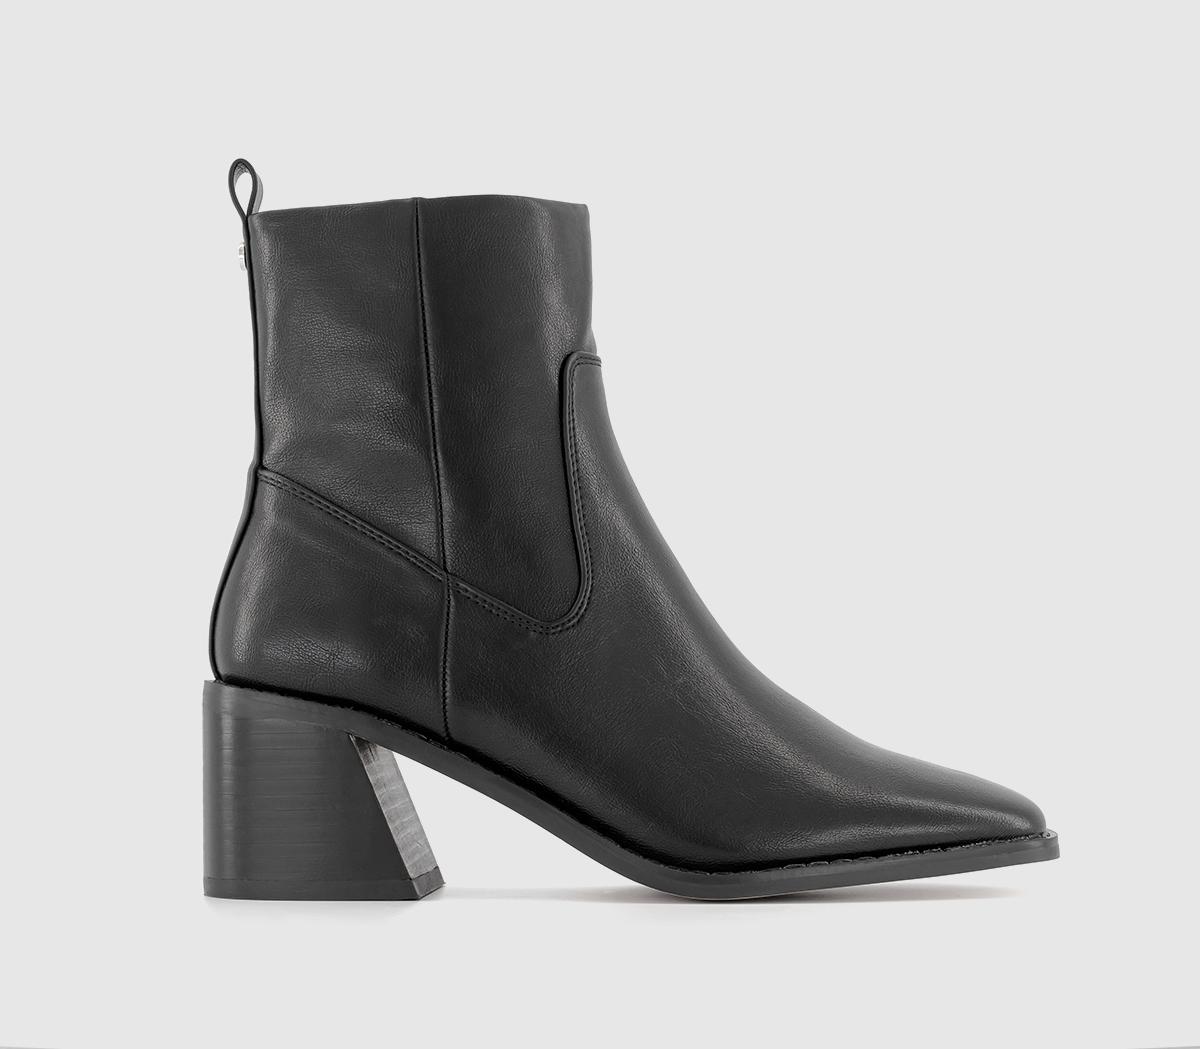 Homadles Women's Ankle Boots Wide Low Heel- Middle Heel with Zipper  Pointed-toe Solid Color Boots Black Size 6 - Walmart.com